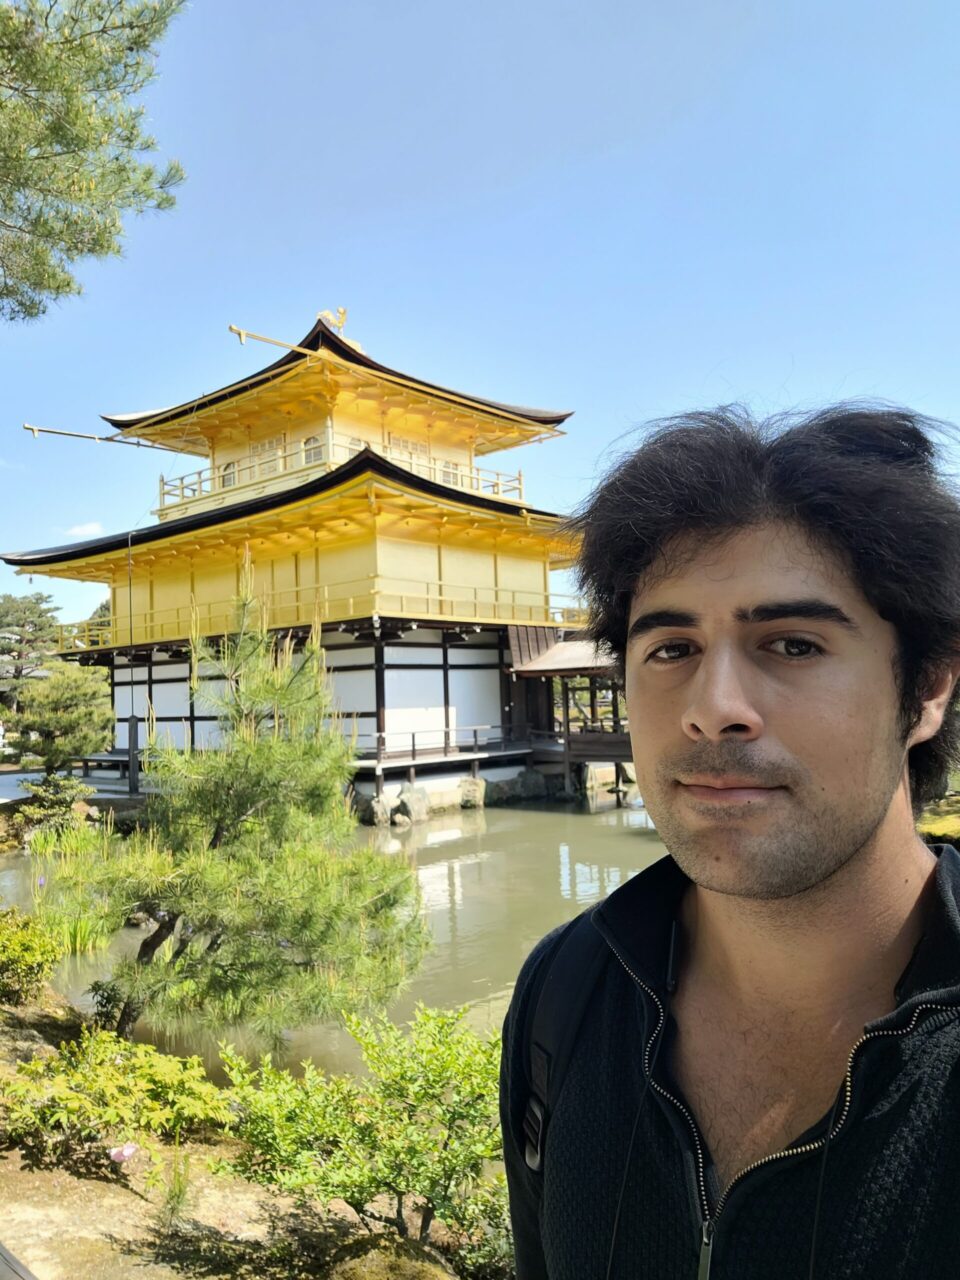 The Golden Pavilion – is it worth visiting?